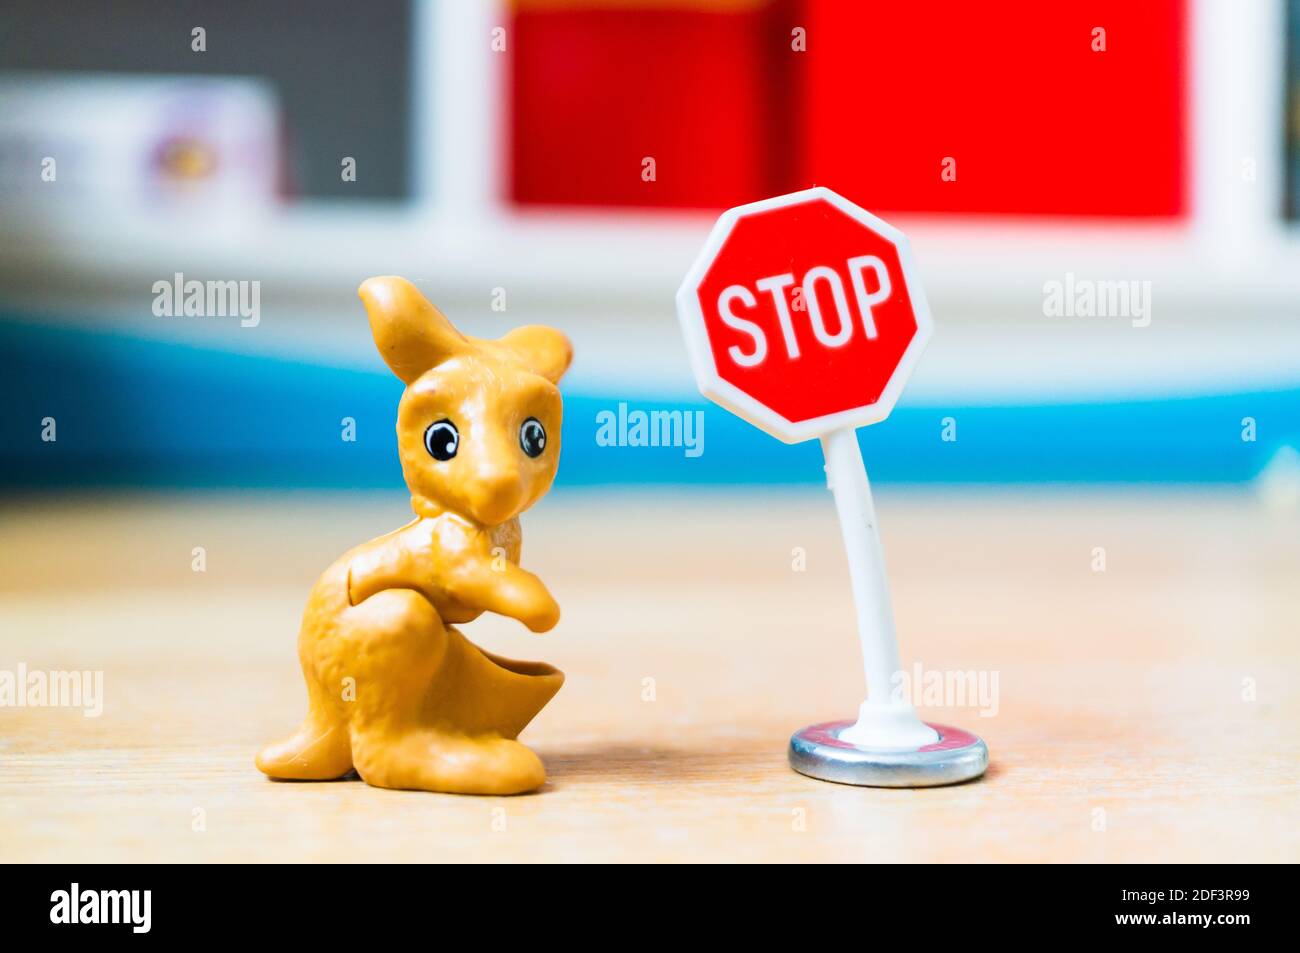 POZNAN, POLAND - Feb 15, 2019: Plastic toy kanagaroo figurine and a stop board in soft focus background. Stock Photo